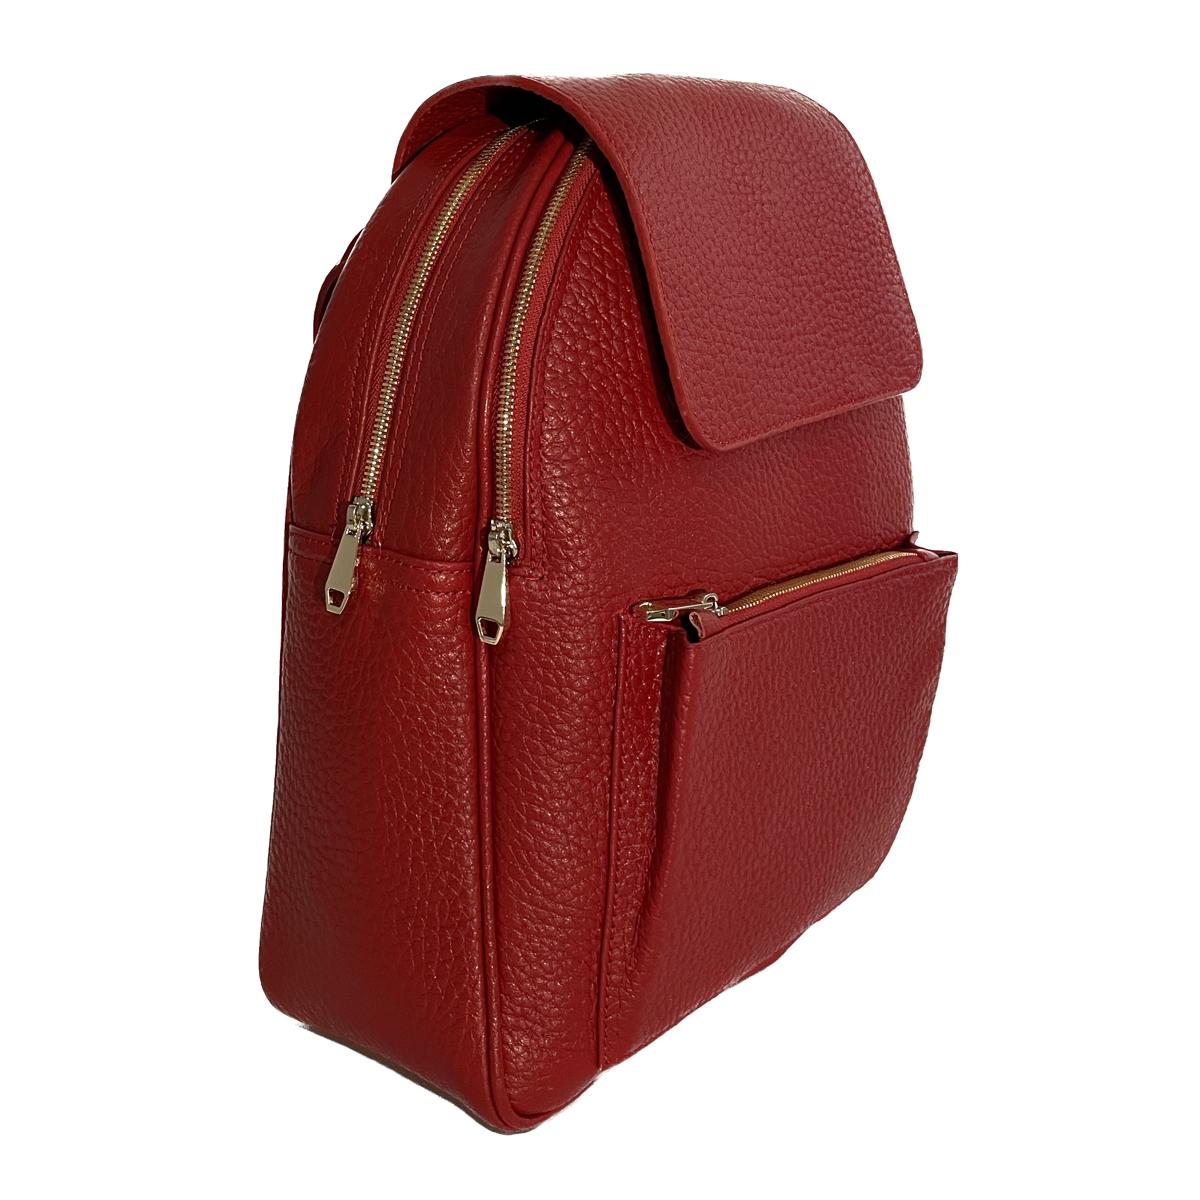 LeatherLuxe - Red Leather Women's Backpack Genuine leather Designer Premium leather bag for women leather hobo tote messenger bag Leather Accessories Leather Shop Leather Goods